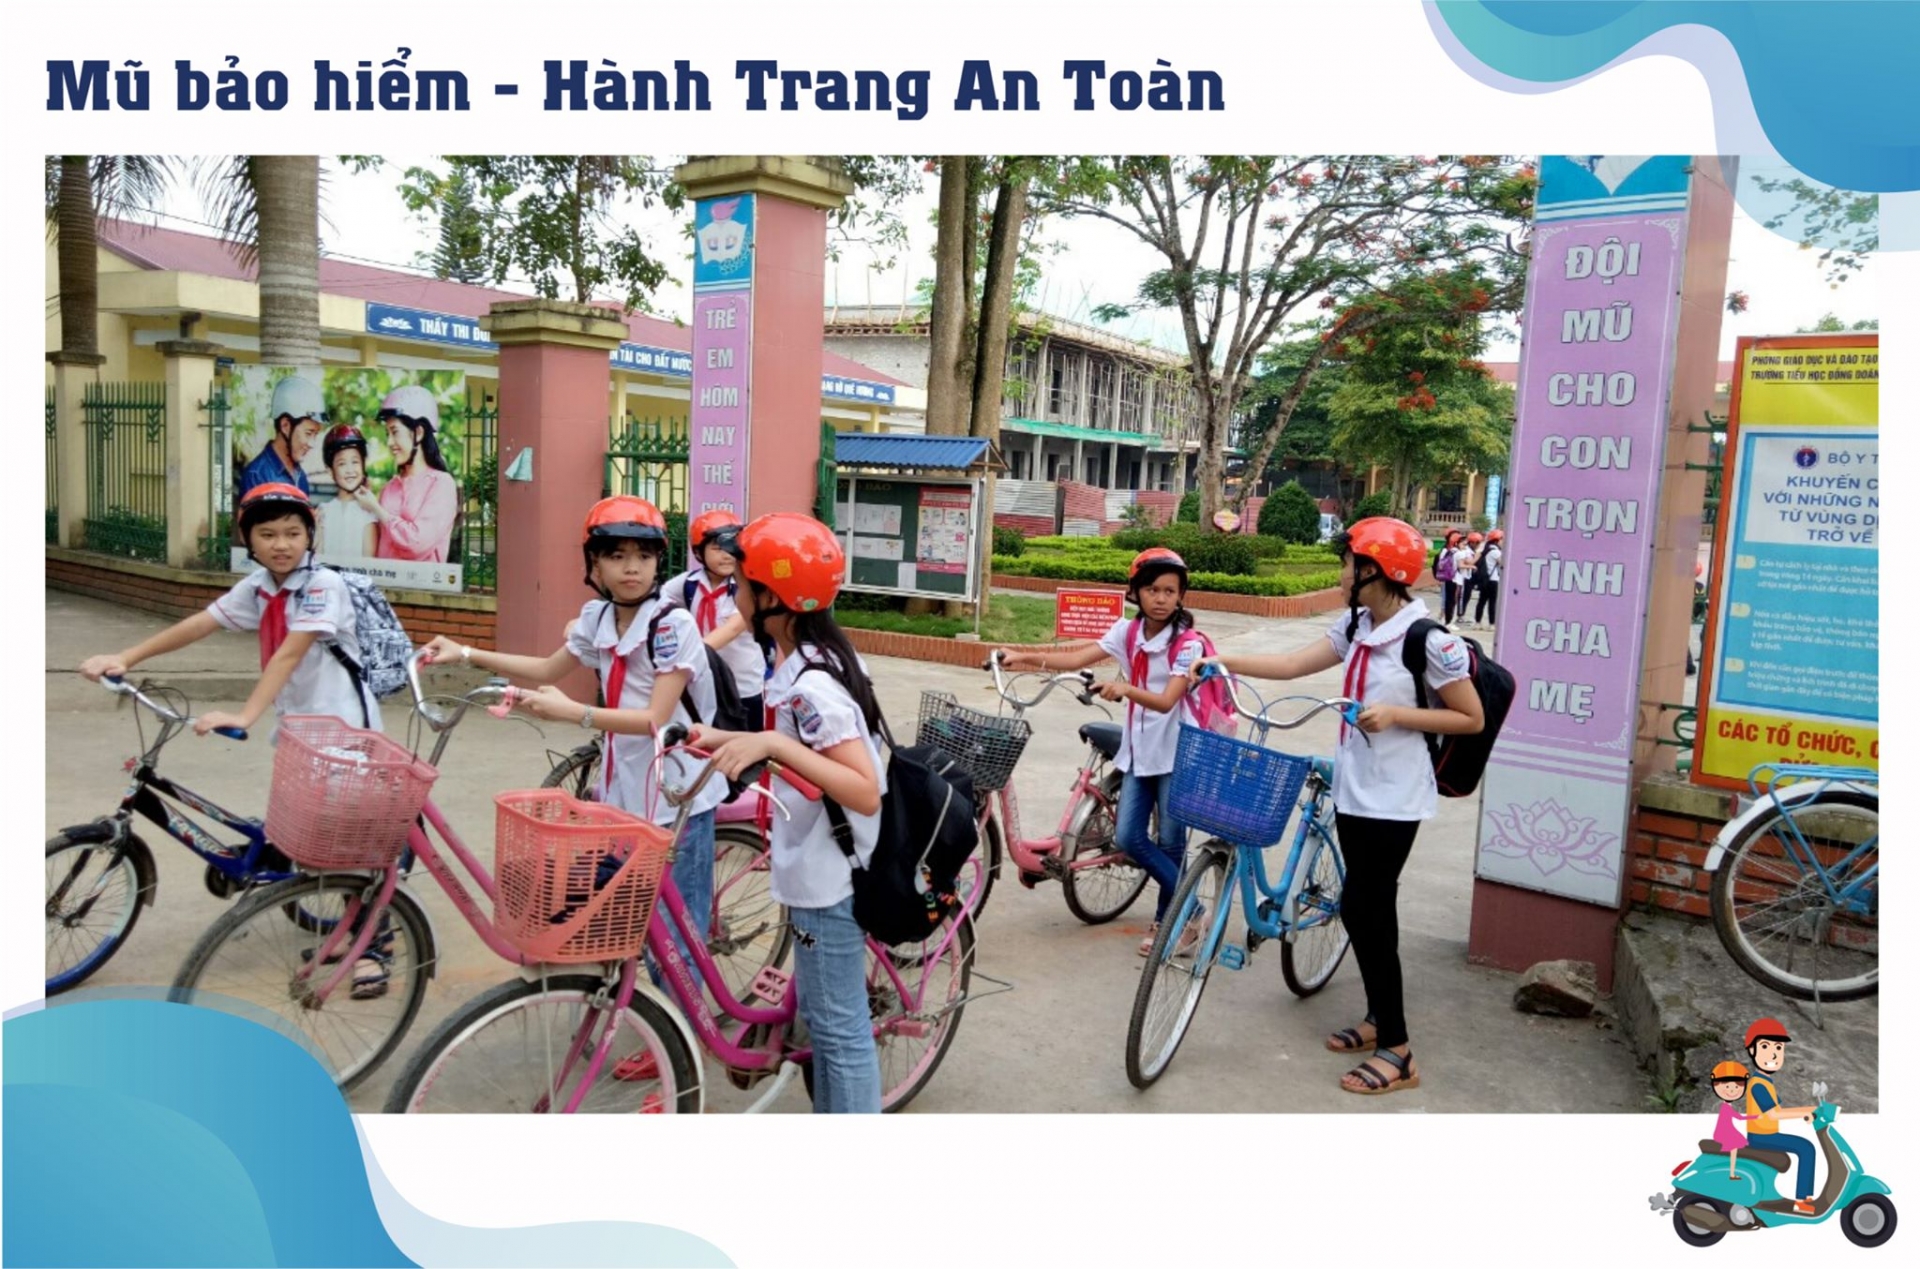 Safety Delivered kicks off new multimedia campaigns in Vietnam